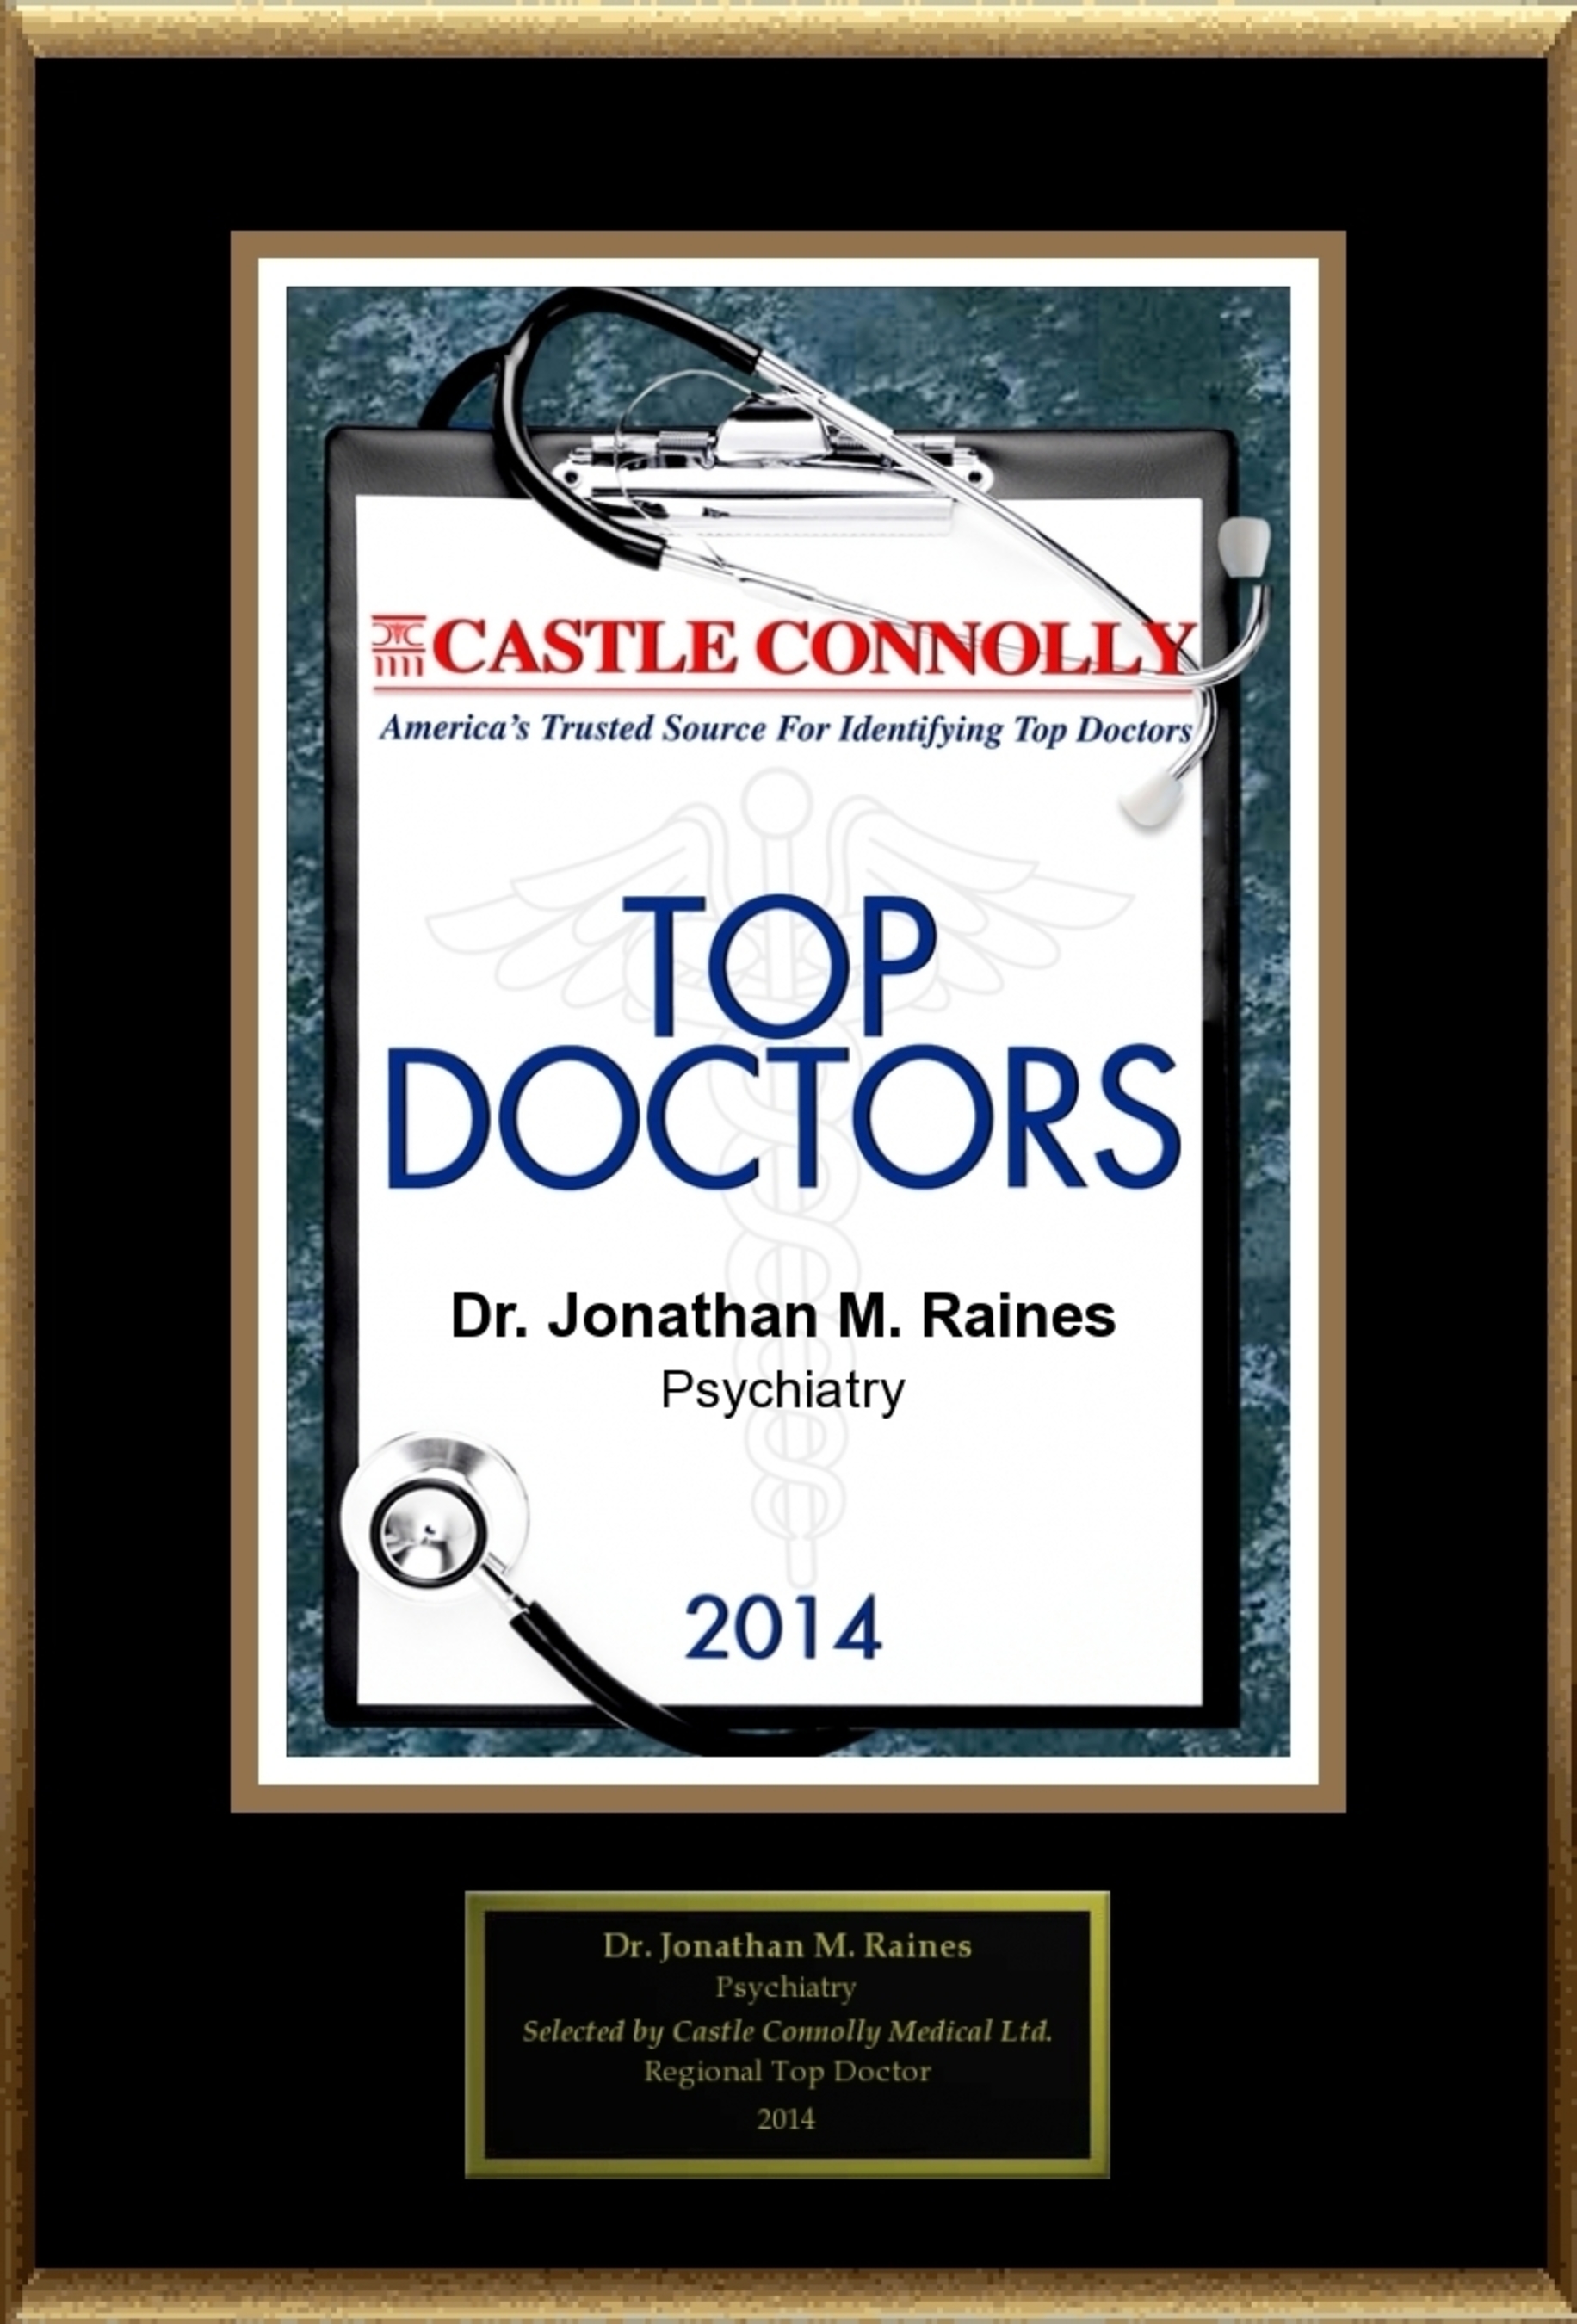 Dr. Jonathan M. Raines is recognized among Castle Connolly's Top Doctors(R) for Gladwyne, PA region in 2014. (PRNewsFoto/American Registry)